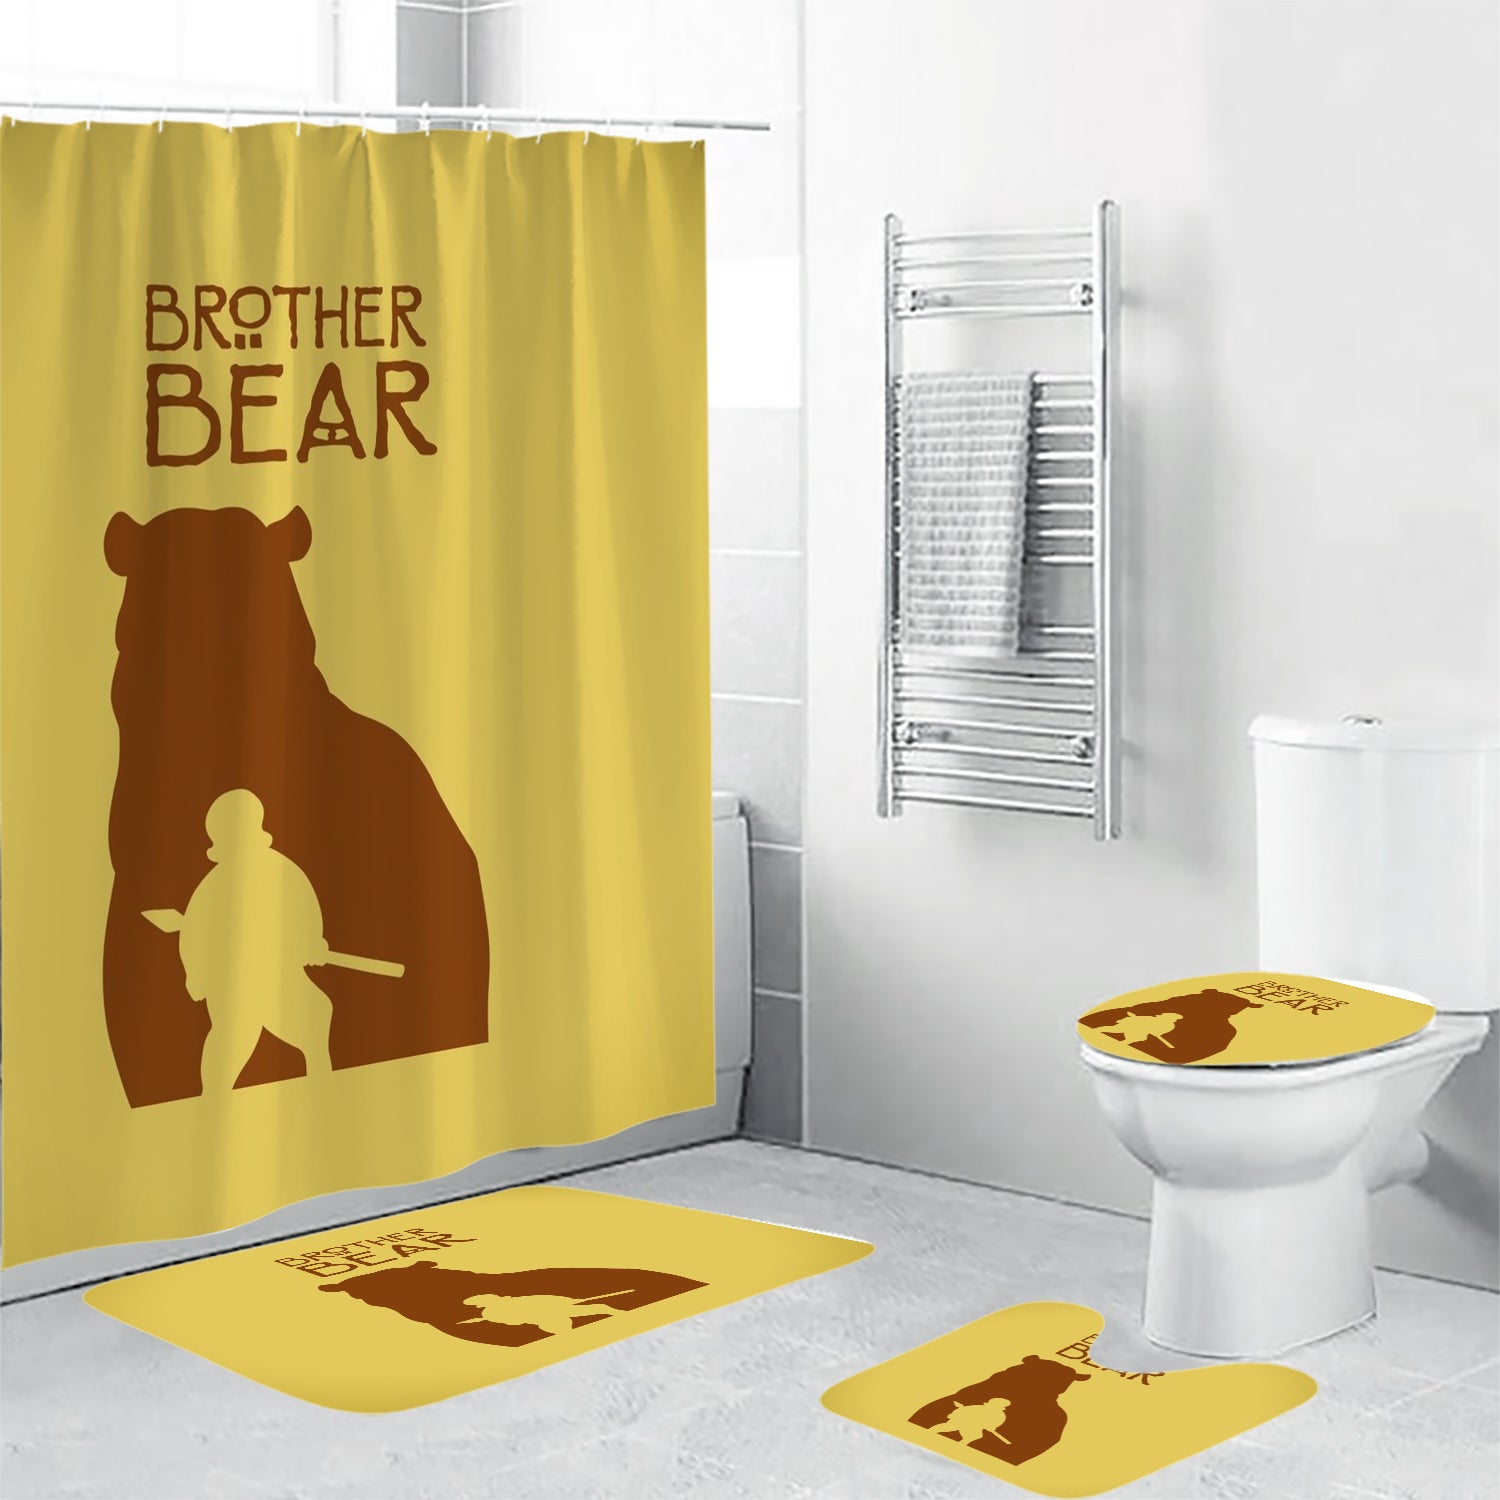 Brother Bear Poster 7 4PCS Shower Curtain Non-Slip Toilet Lid Cover Bath Mat - Bathroom Set Fans Gifts